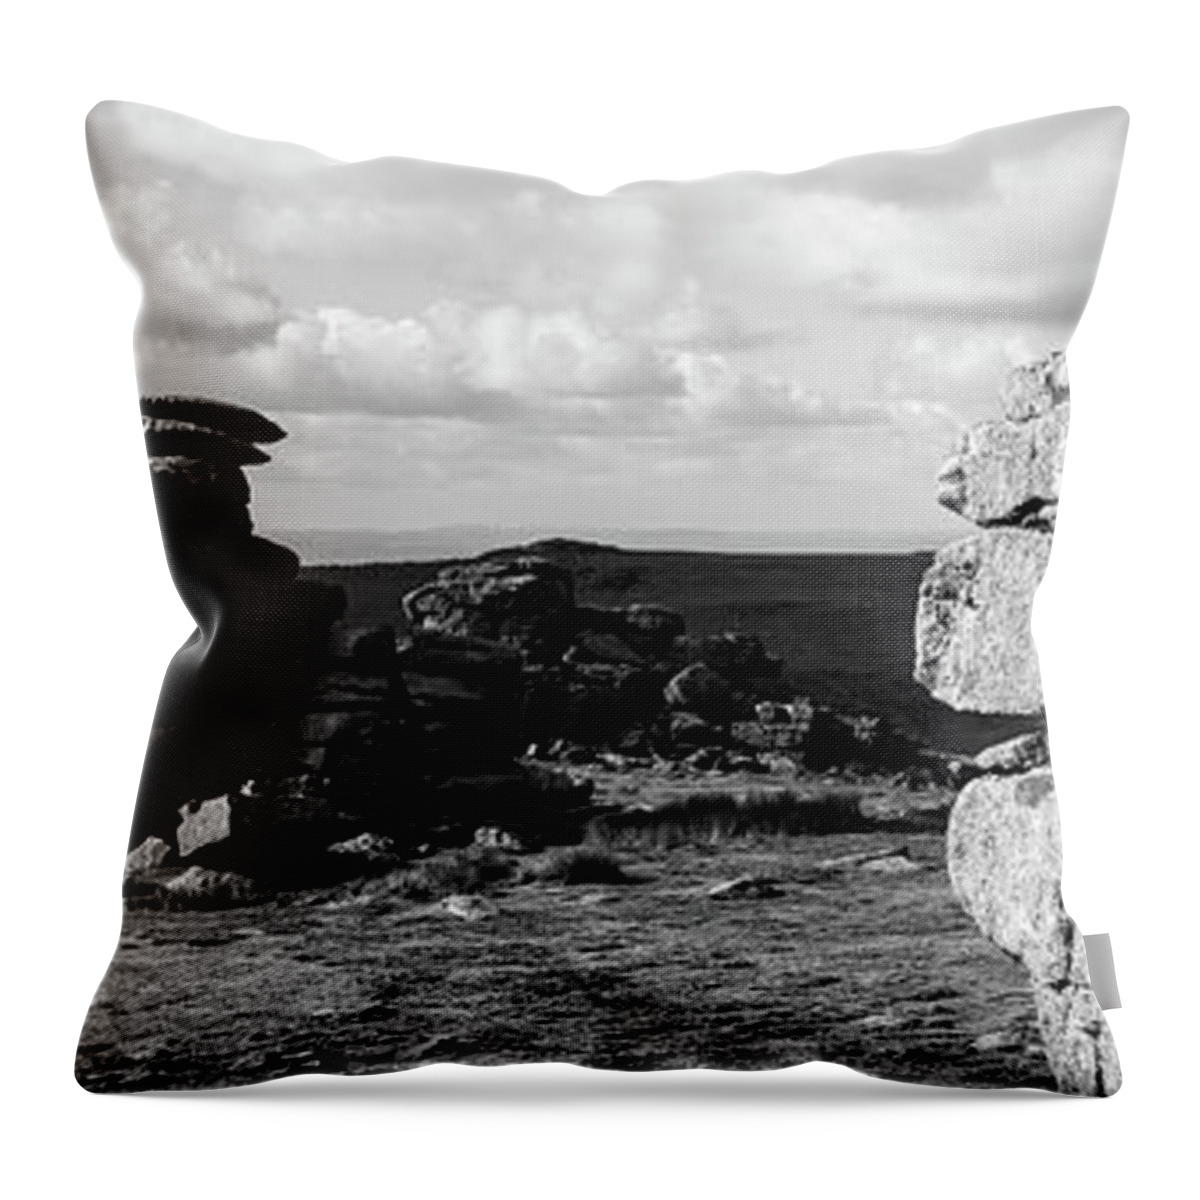 Devon Throw Pillow featuring the photograph Great Staple Tor Dartmoor National Park England Panorama Black And White by Sonny Ryse